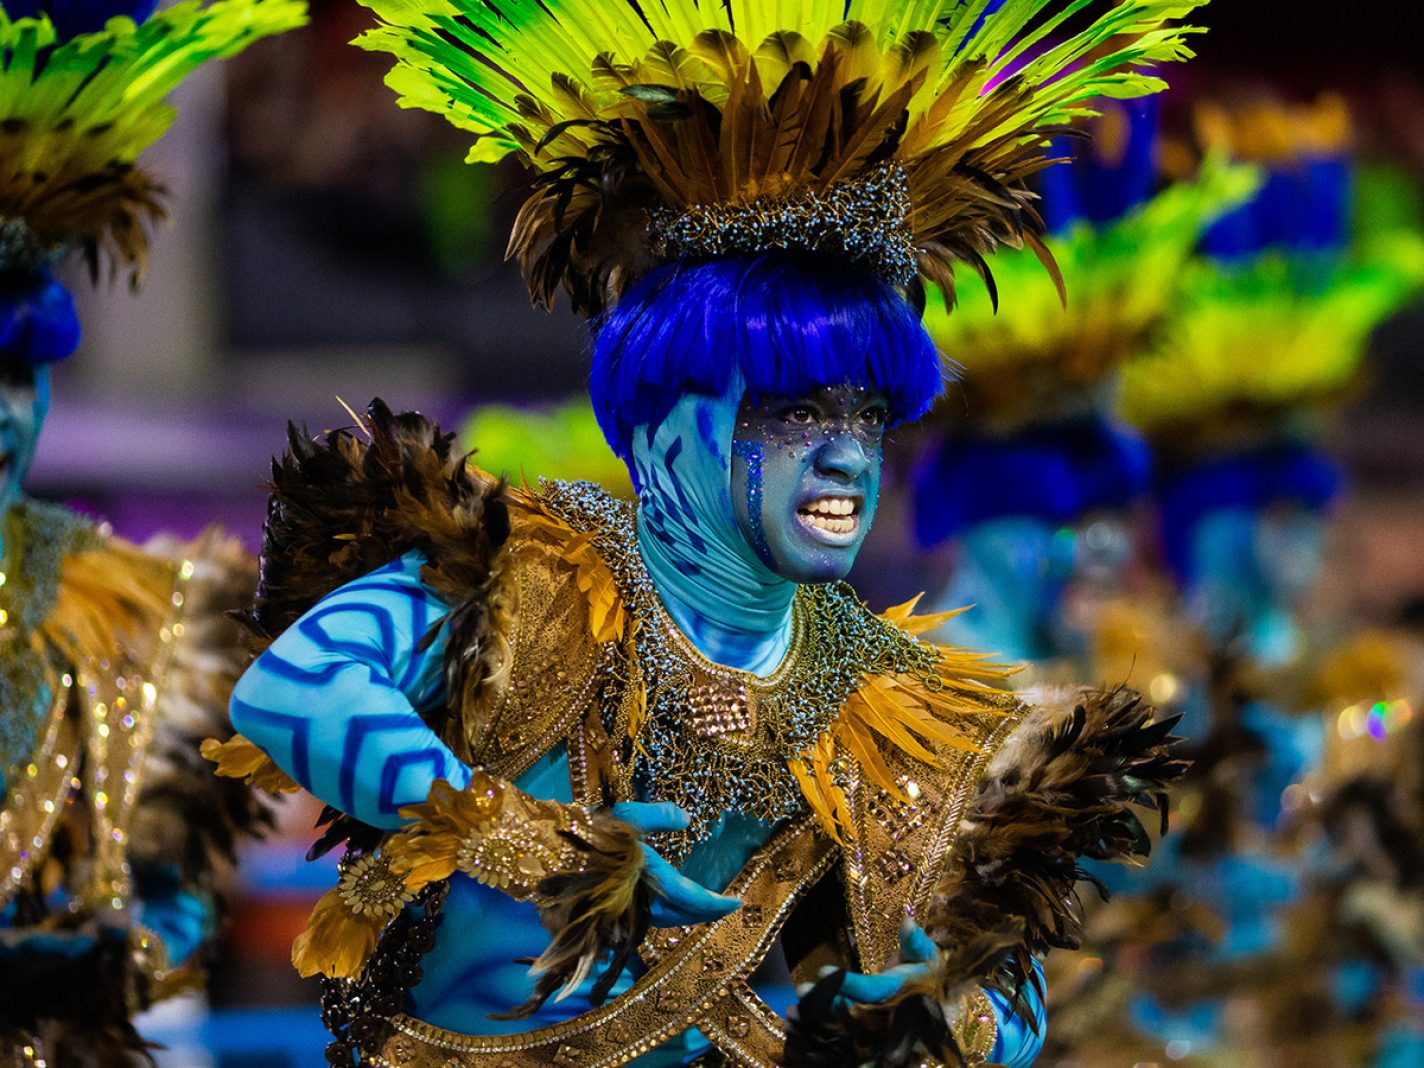 Brazil Suspends Famed Annual Carnival Due To COVID19 & More in Today’s